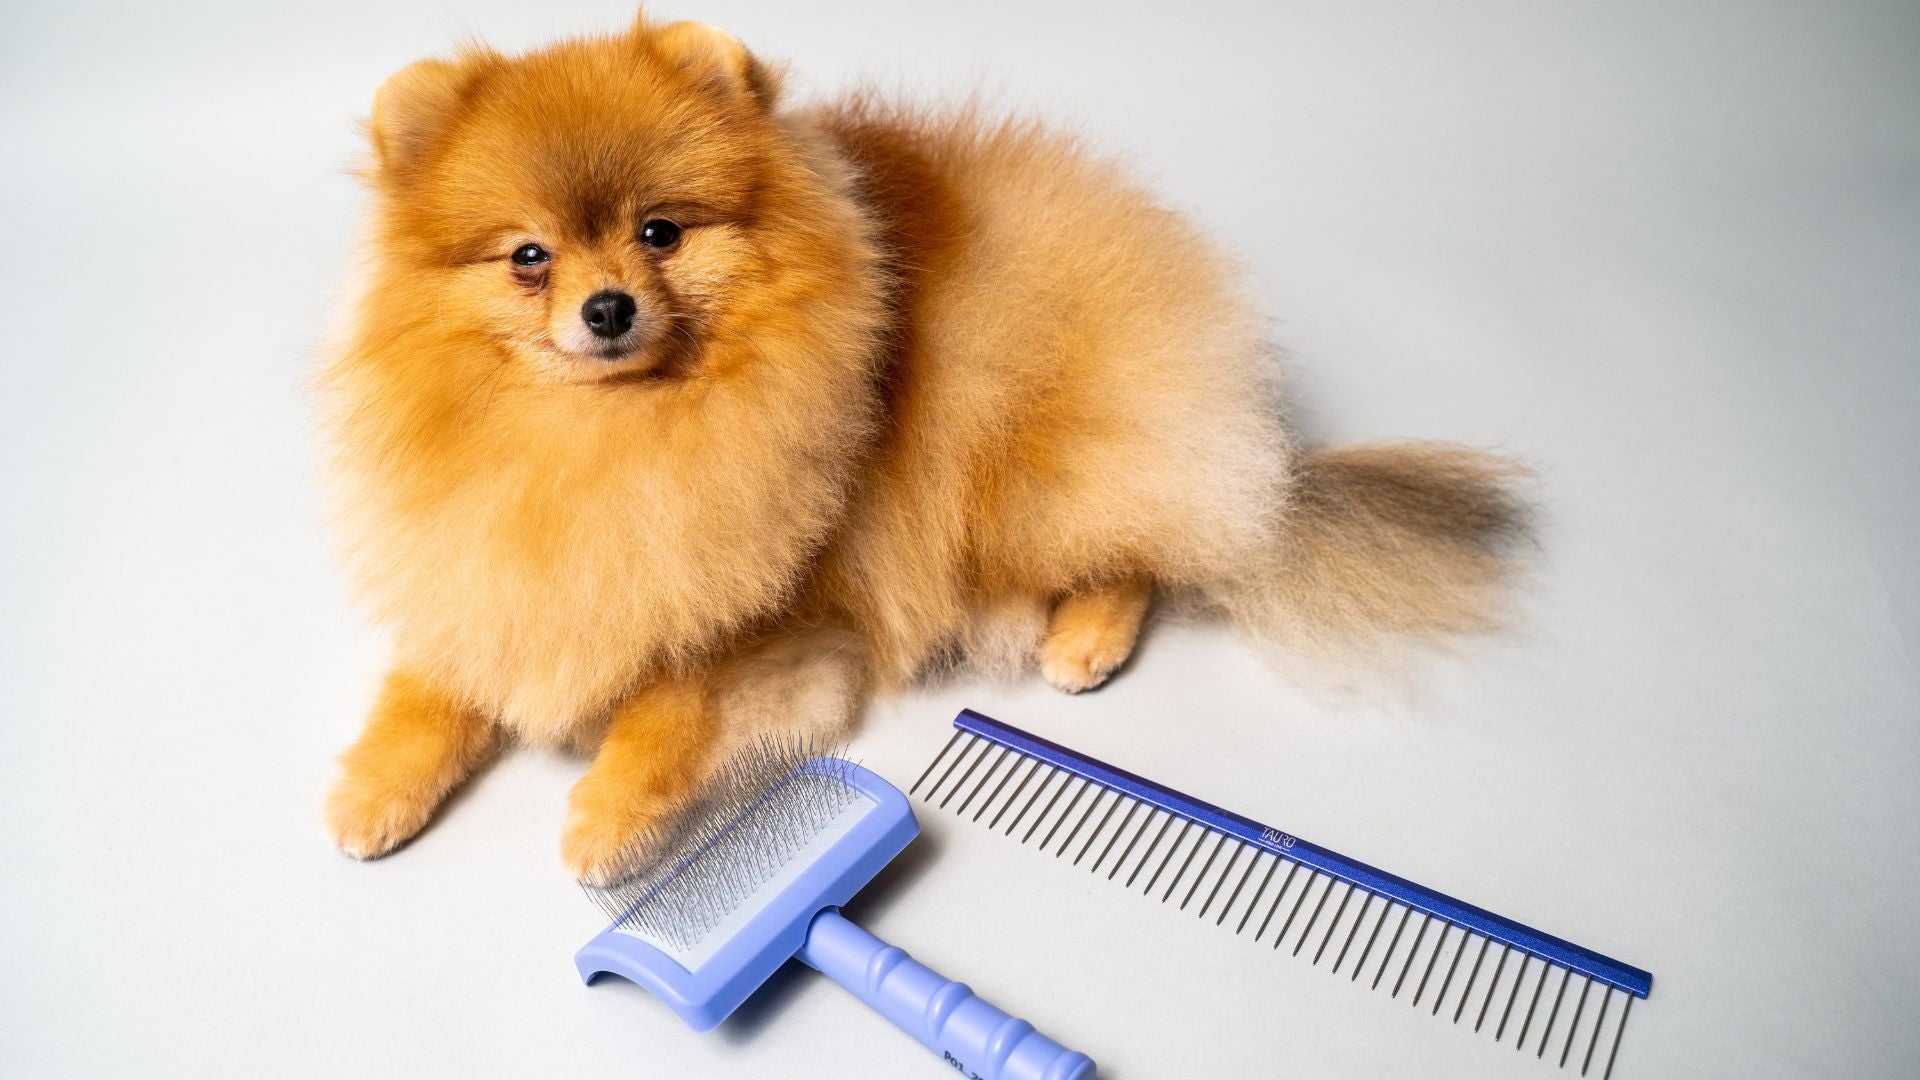 How Often Should You Brush Your Dog? Expert Tips for Every Breed